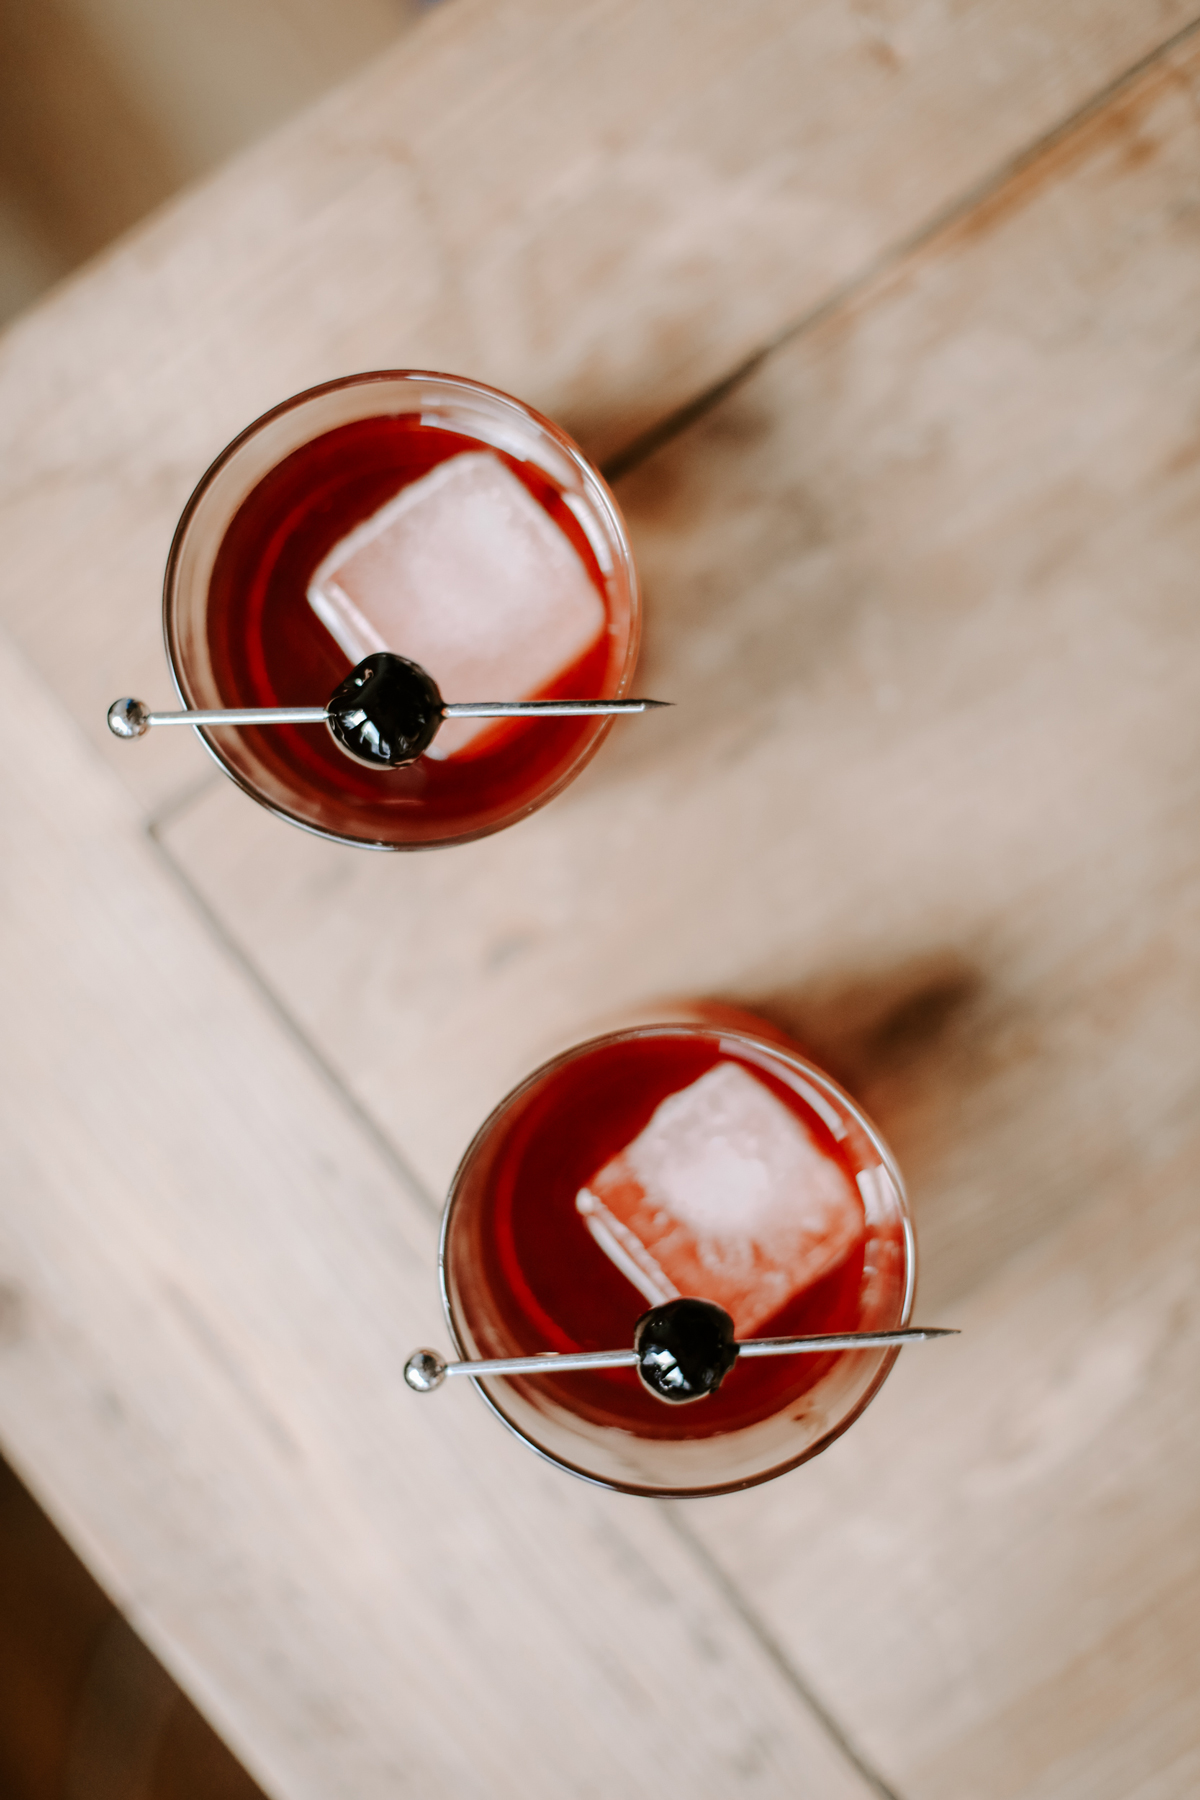 boulevardier-cocktail-chasingkendall6